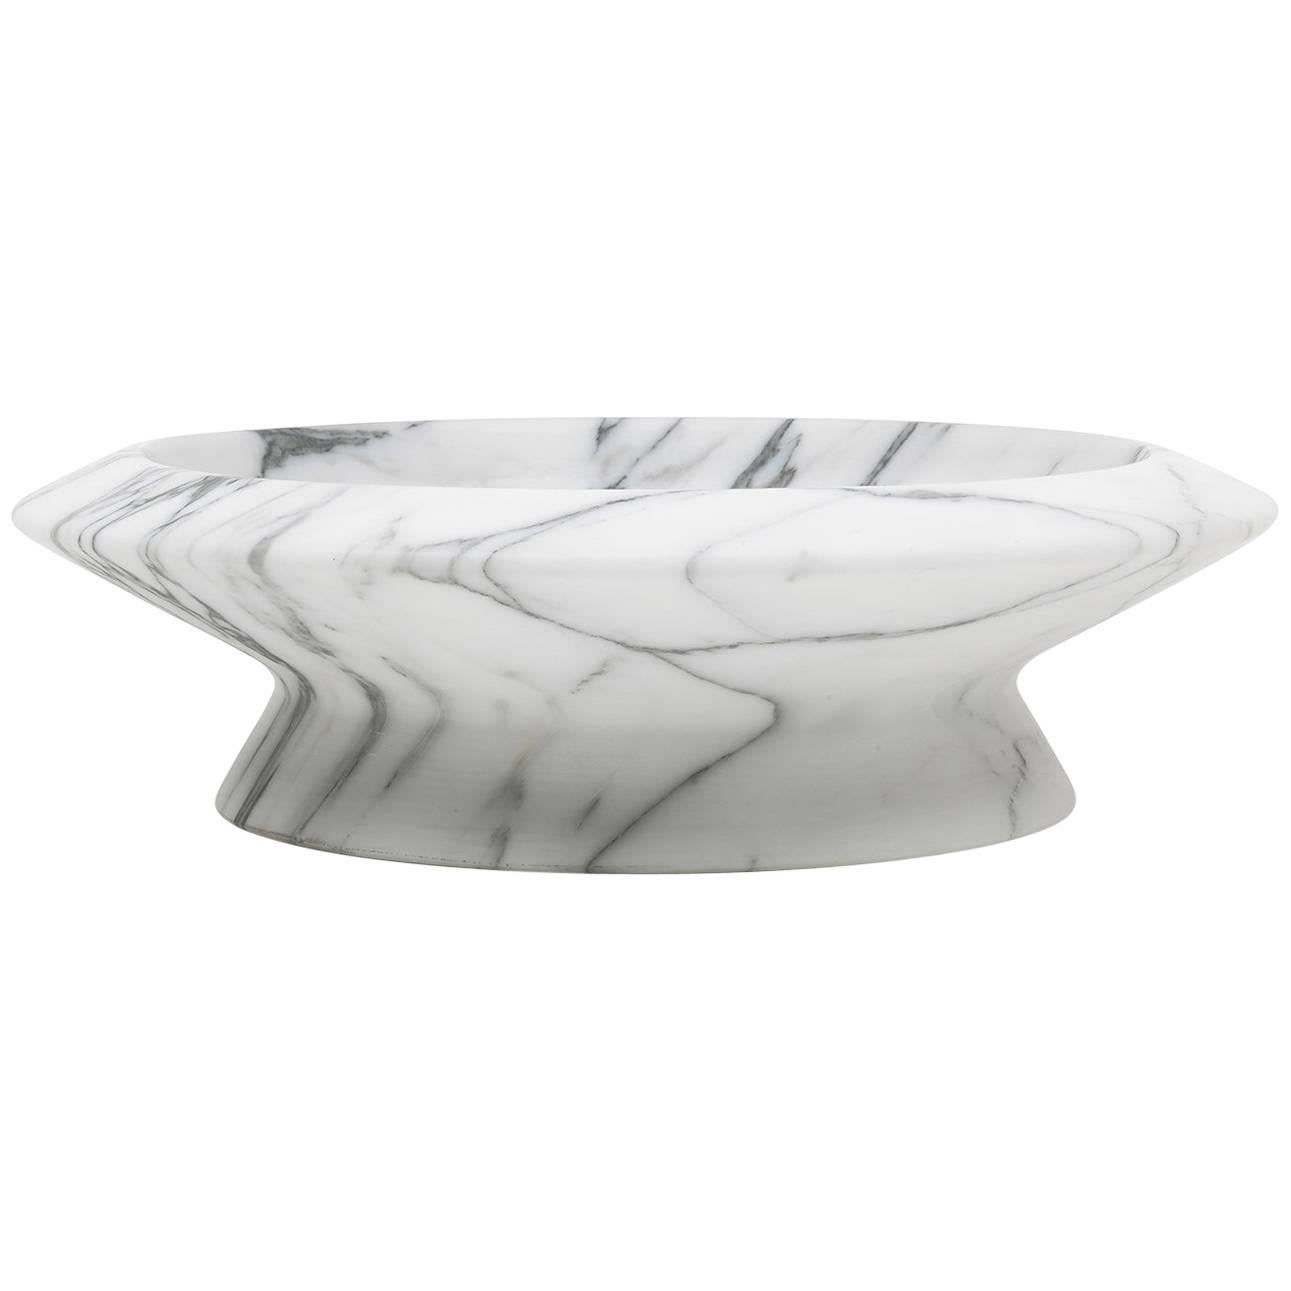 New Modern Centrepiece in White Arabescato Marble Creator Ivan Colominas, Stock For Sale